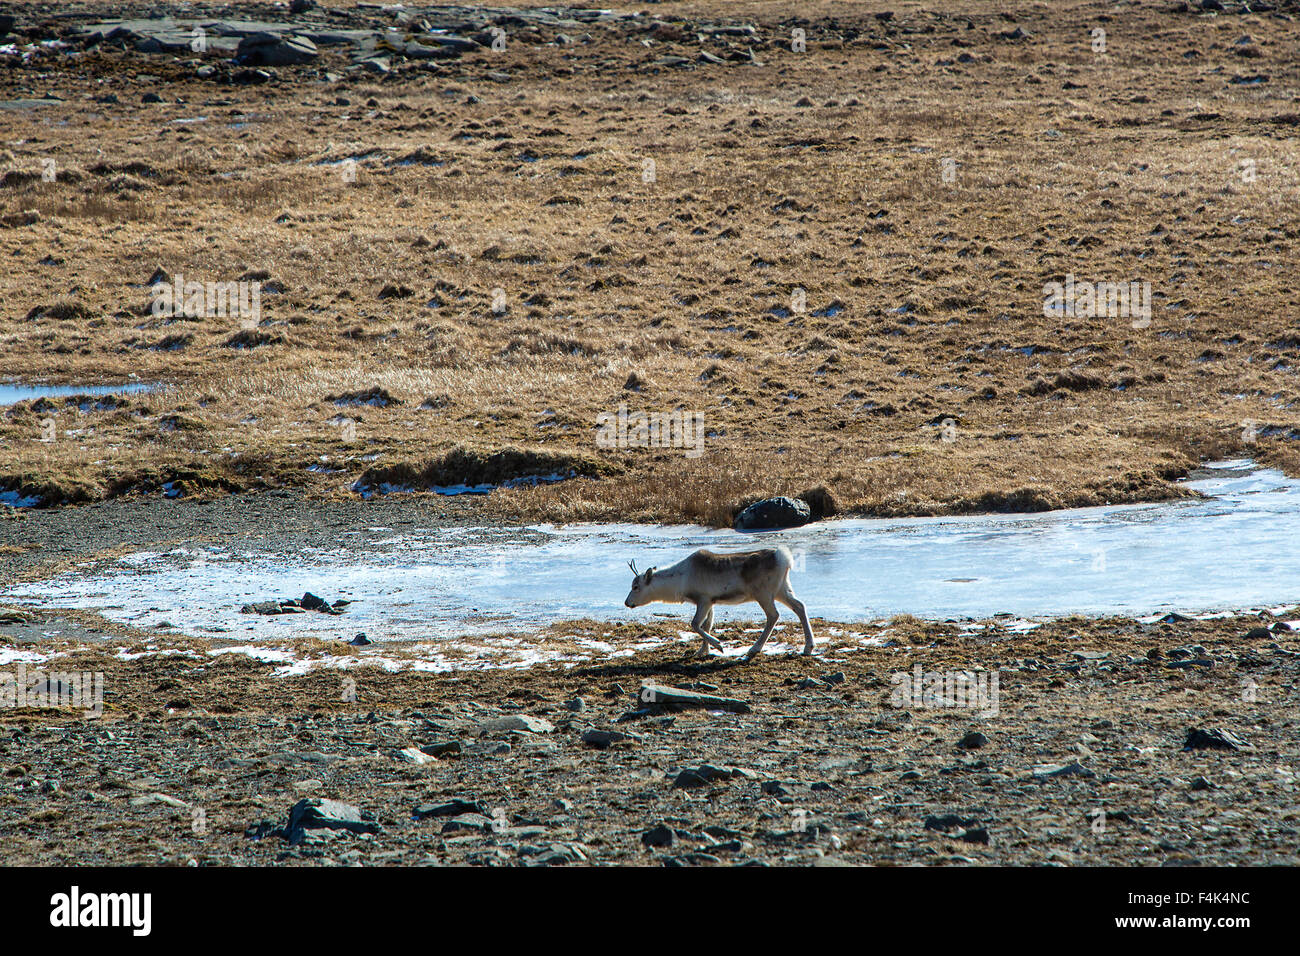 Reindeer at a lake in Iceland Stock Photo